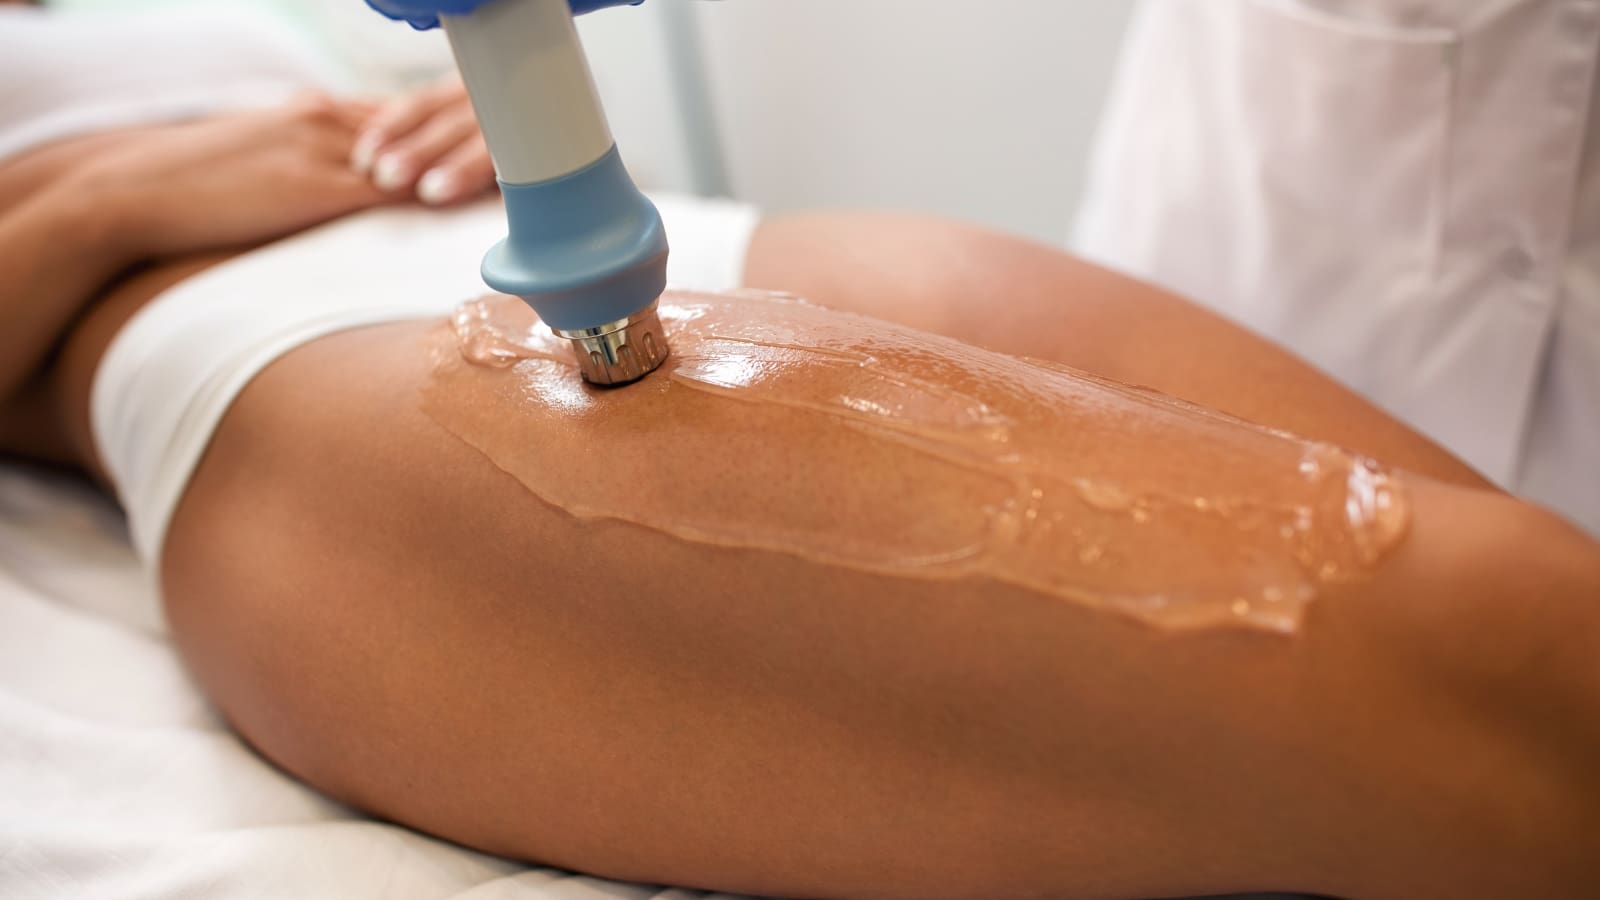 X-wave treatment for cellulite